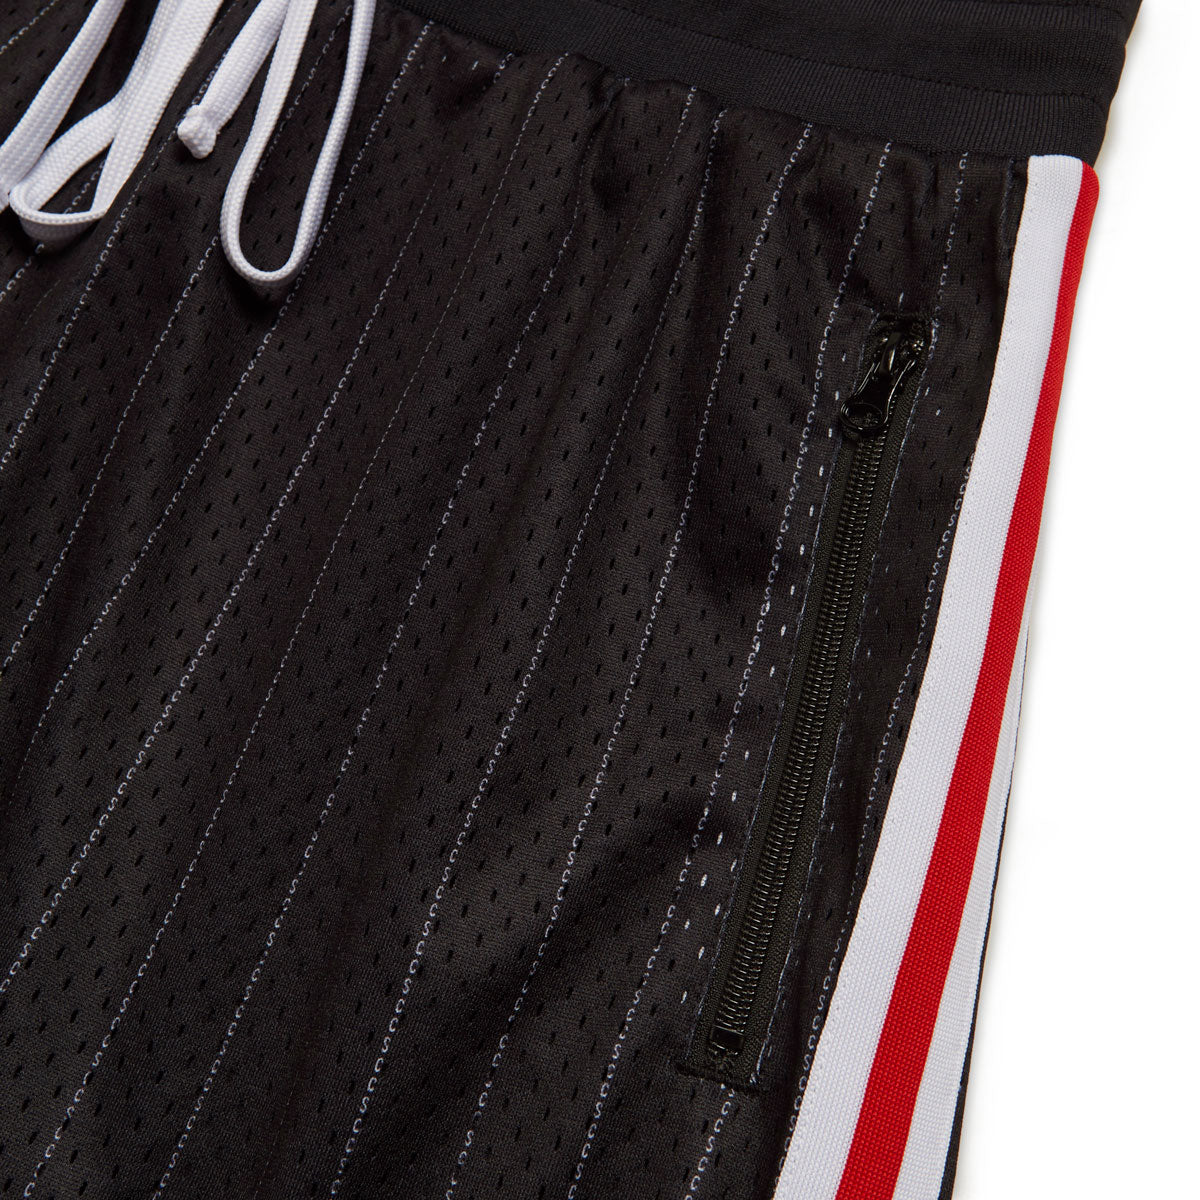 CCS Crossover Basketball Shorts - Black/Red image 3